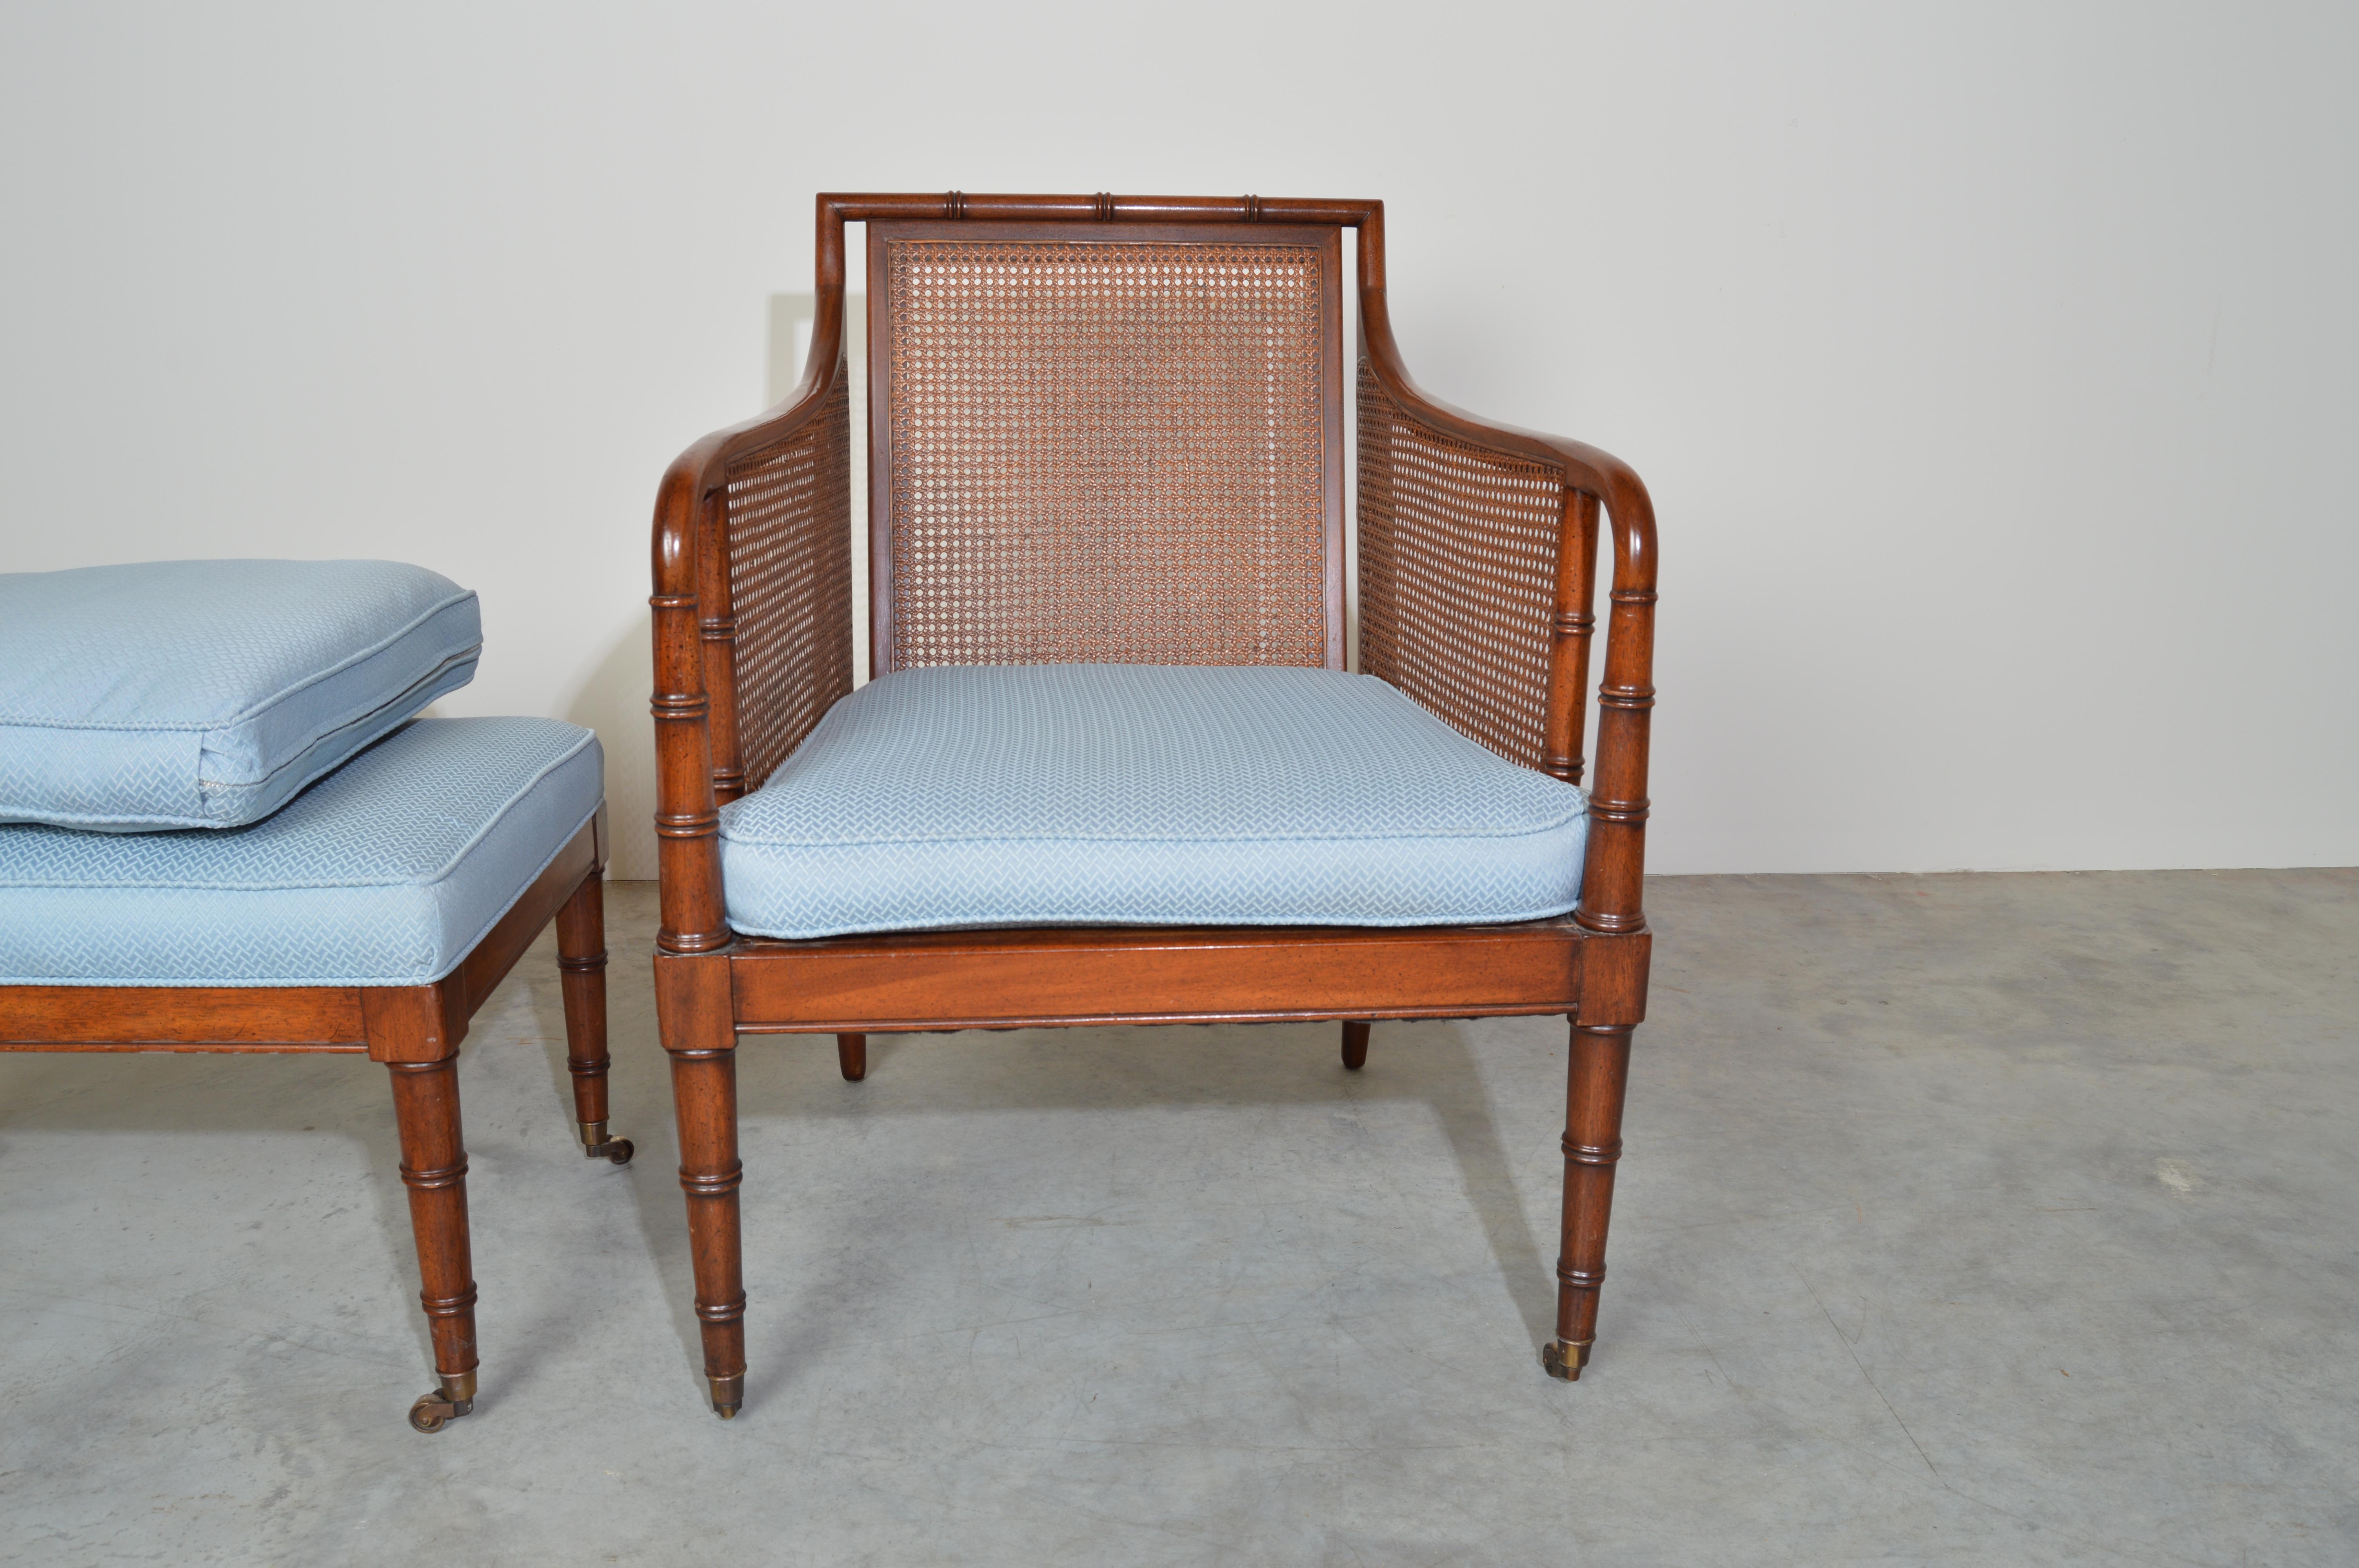 Cotton Hickory Chair & Ottoman Regency Style Faux Bamboo Caned Chair on Brass Casters